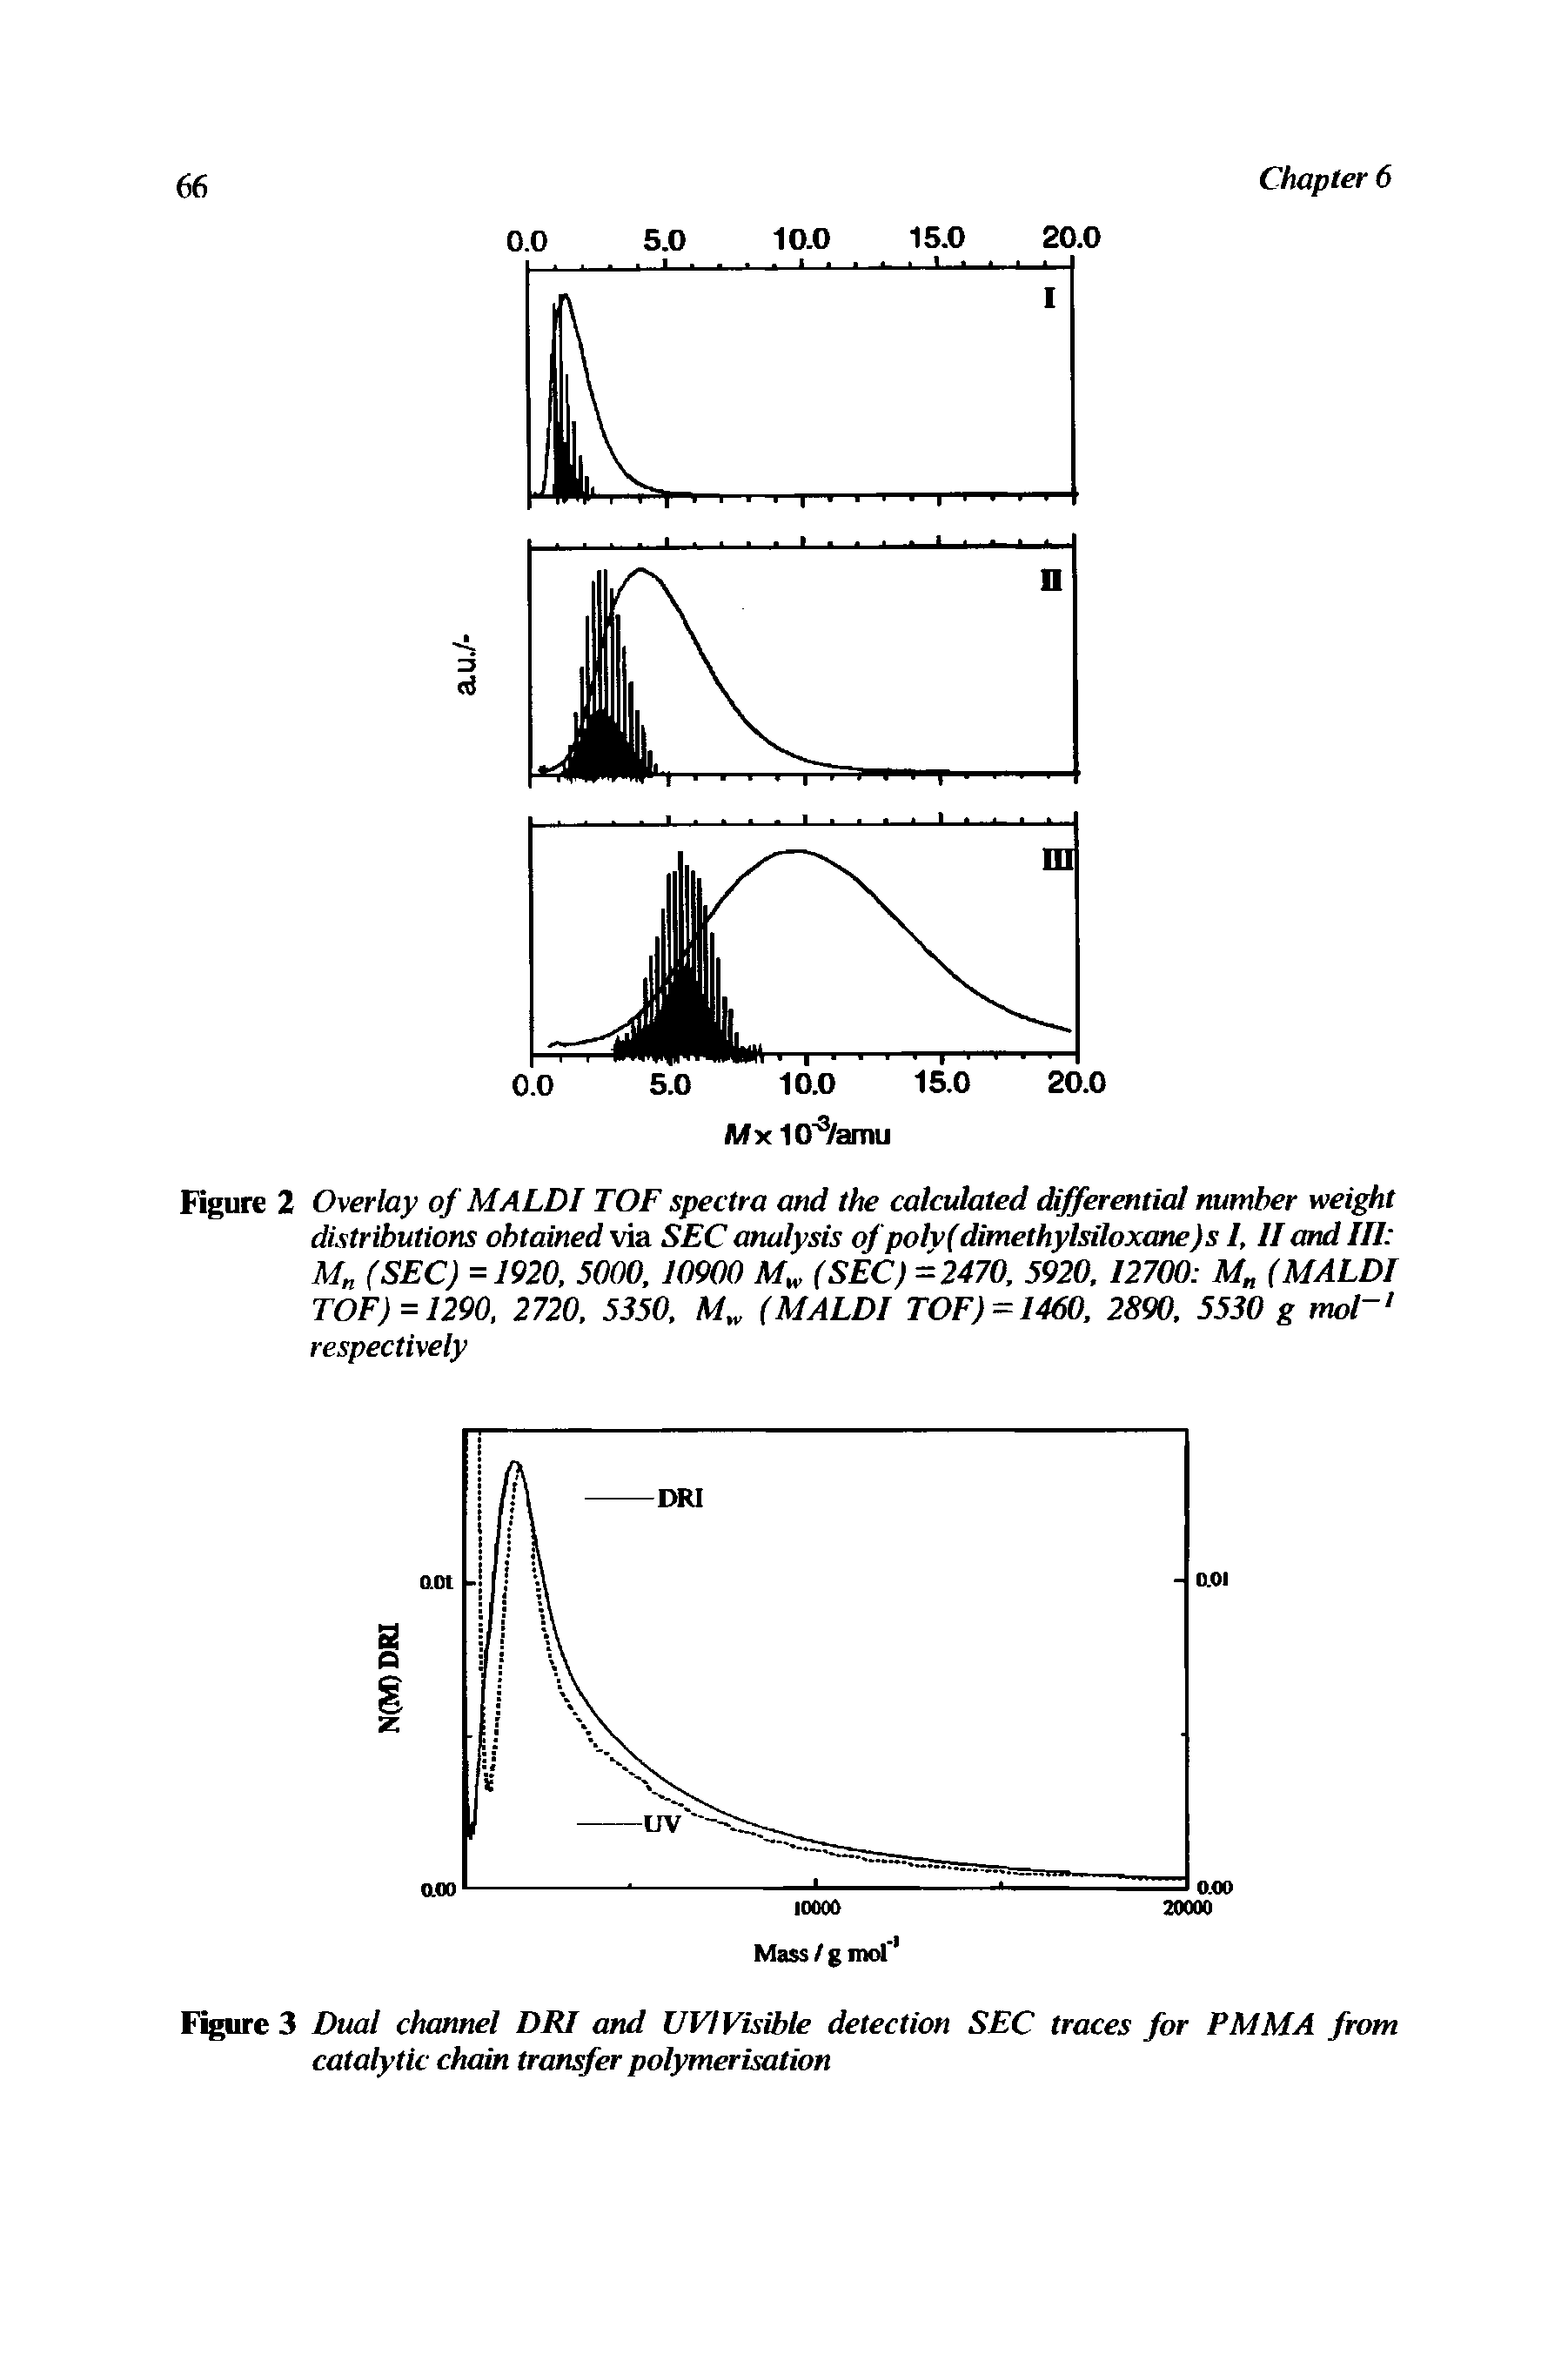 Figure 2 Overlay of MALDI TOF spectra and the calculated differential number weight distributions obtained via SEC analysis ofpolv(dimethylsiloxane)s I, II and III M (SEC) =1920, 5000, 10900 (SEC) =2470. 5920. 12700 M (MALDI TOF) =1290, 2720, 5350, M , (MALDI TOF) = 1460. 2890, 5530 g mol- respectively...